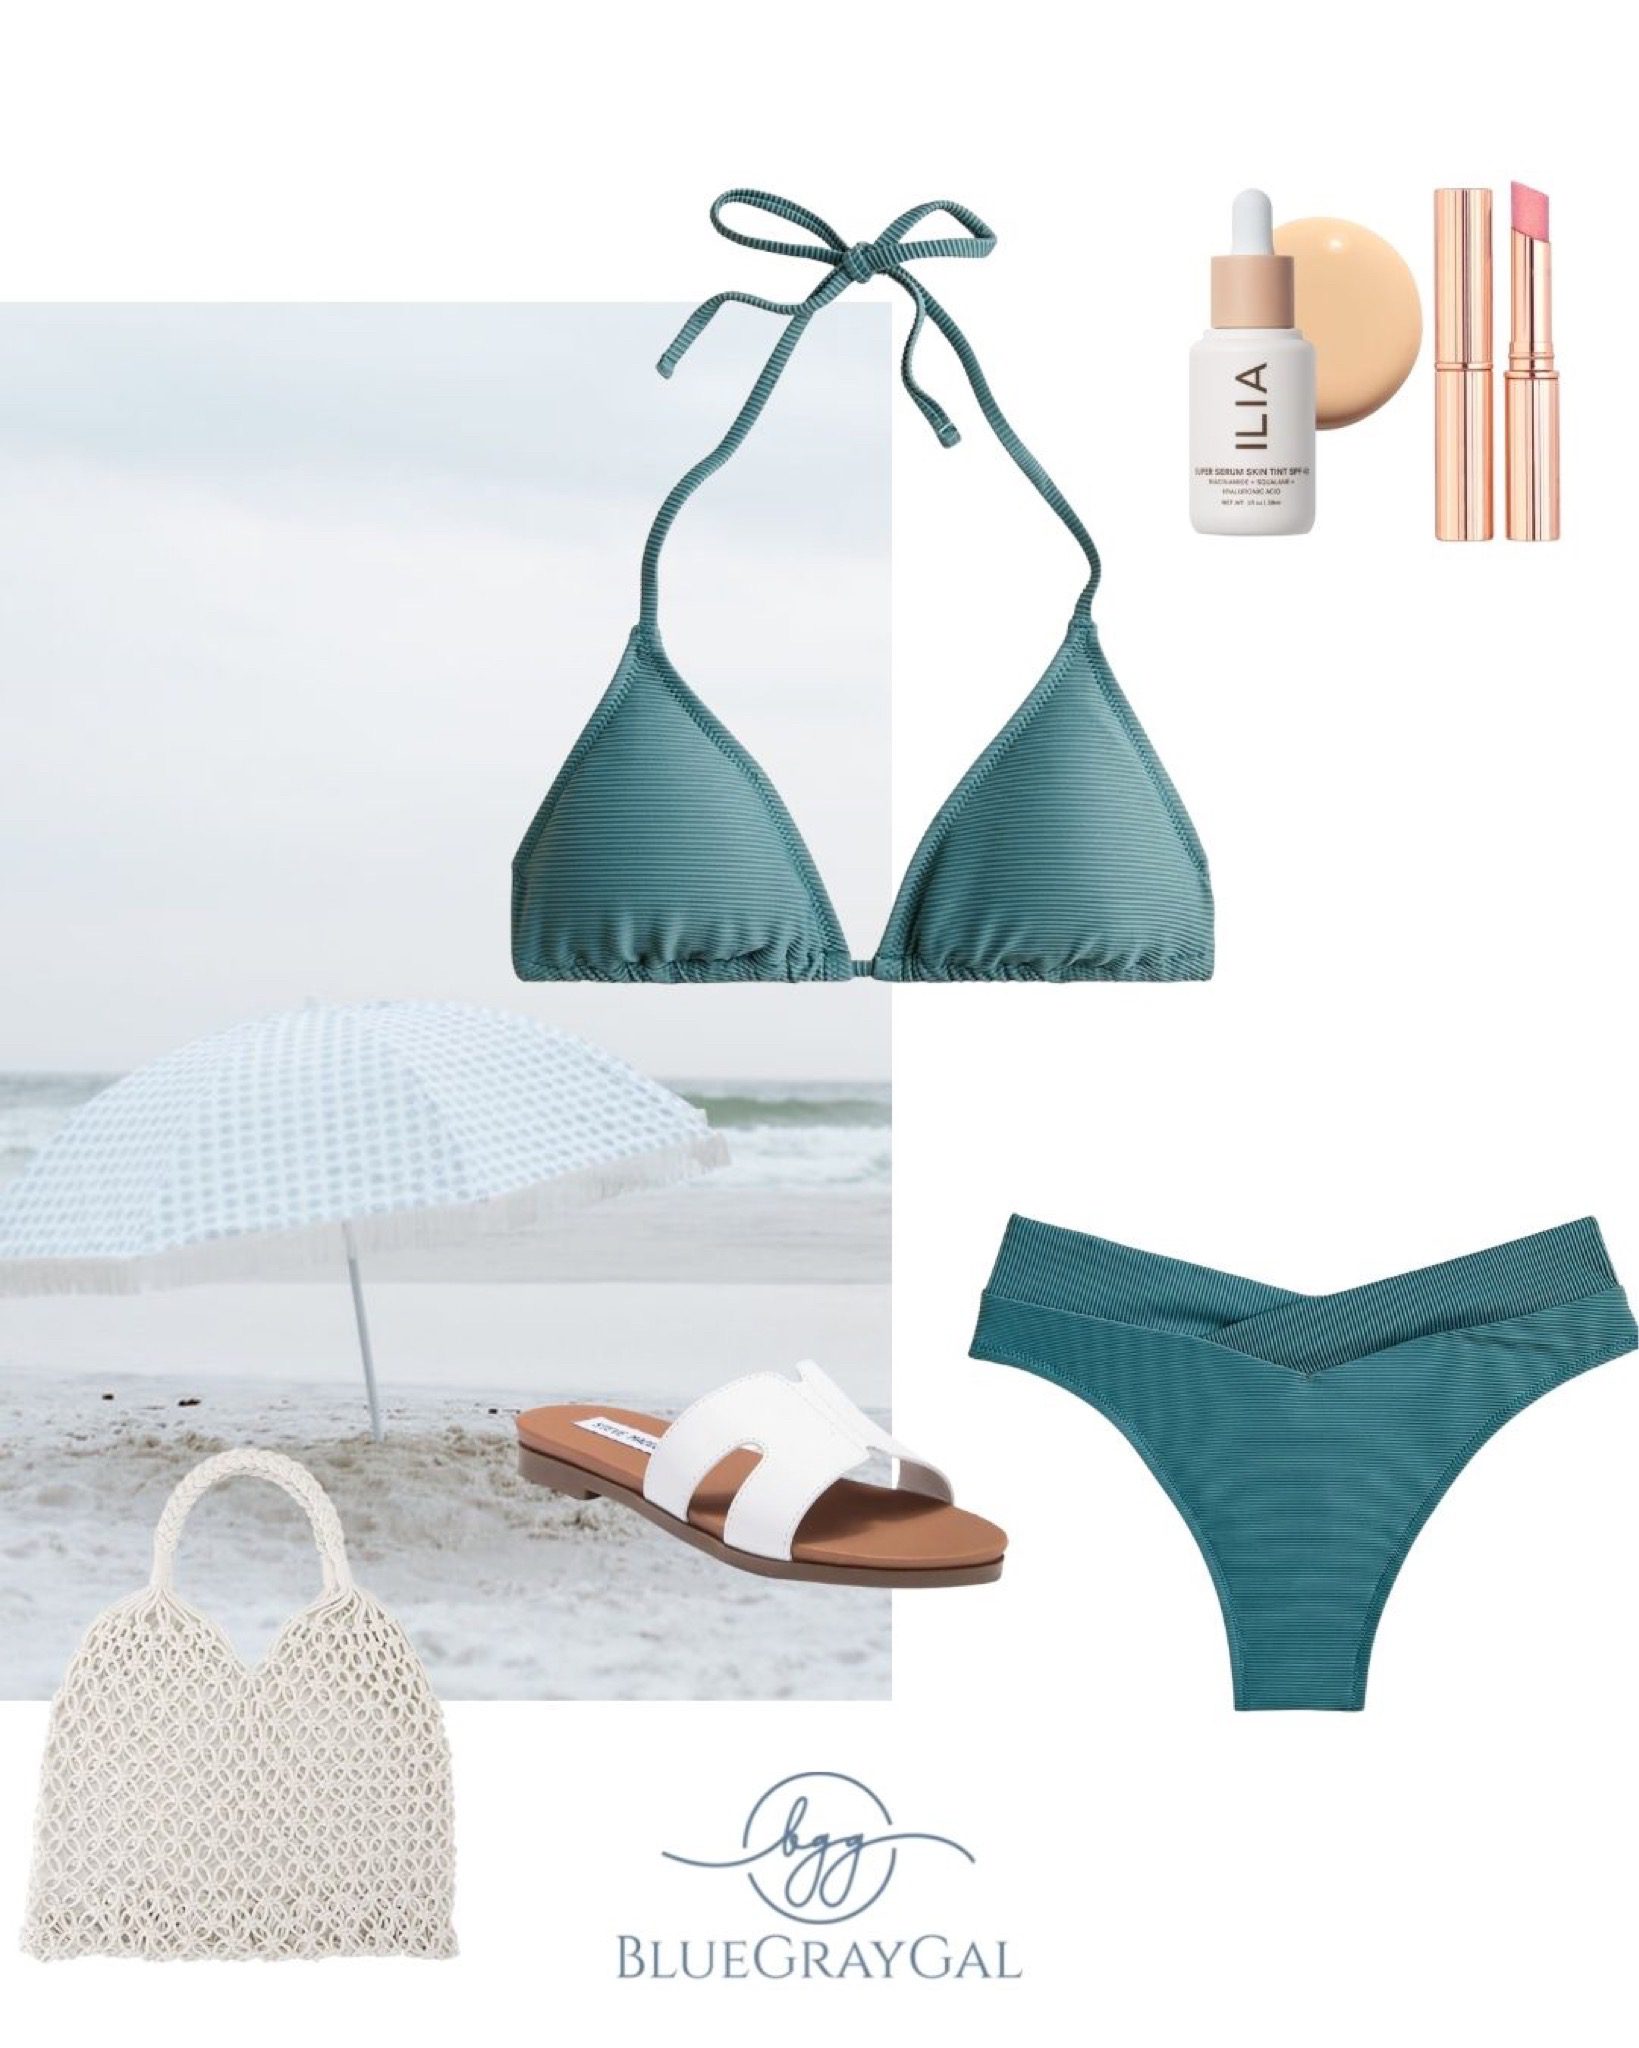 Teal bikini bathing suit with white beach sandals and white beach tote and summer makeup essentials.